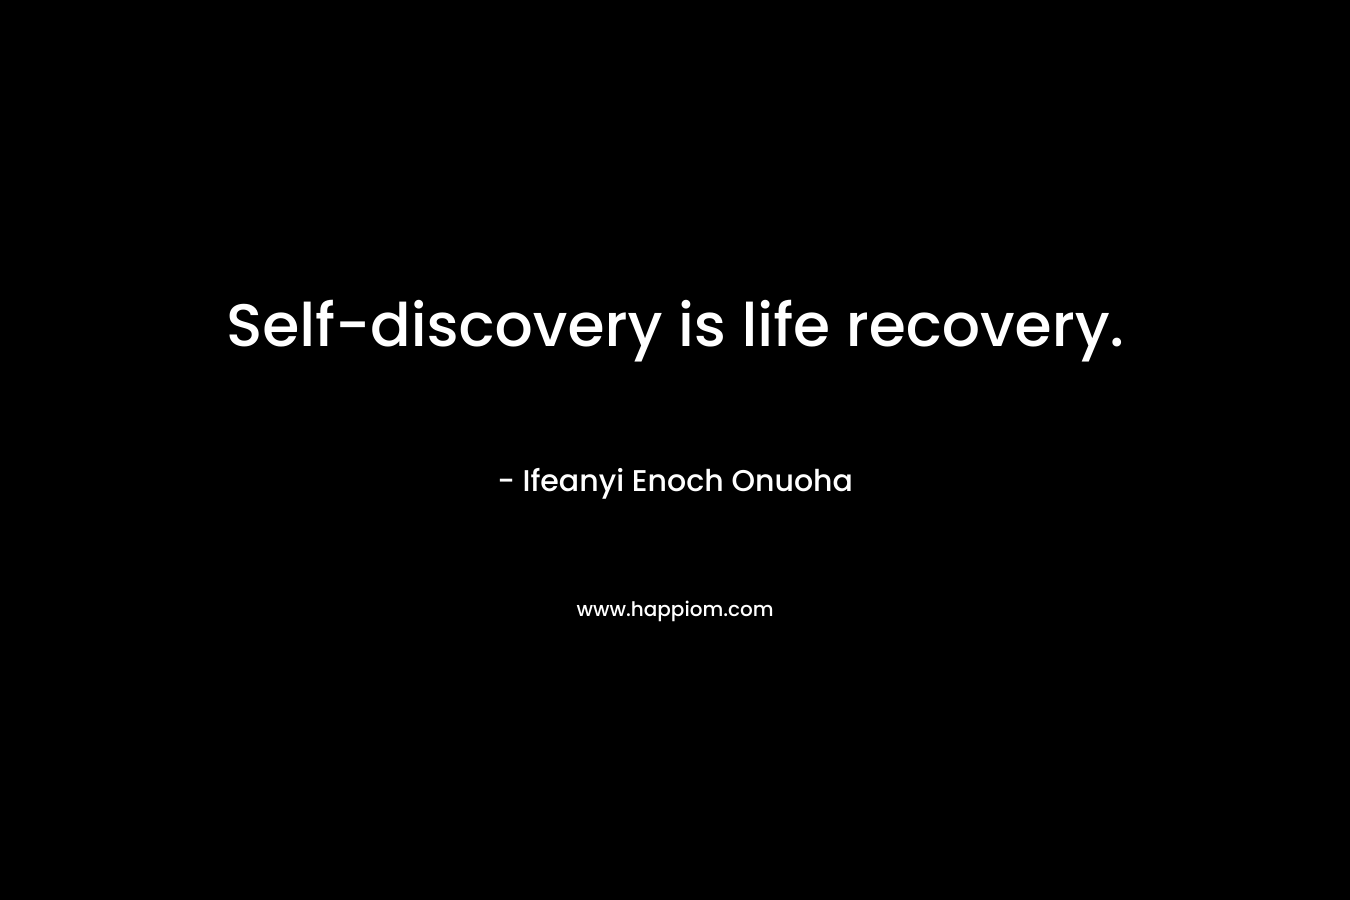 Self-discovery is life recovery.